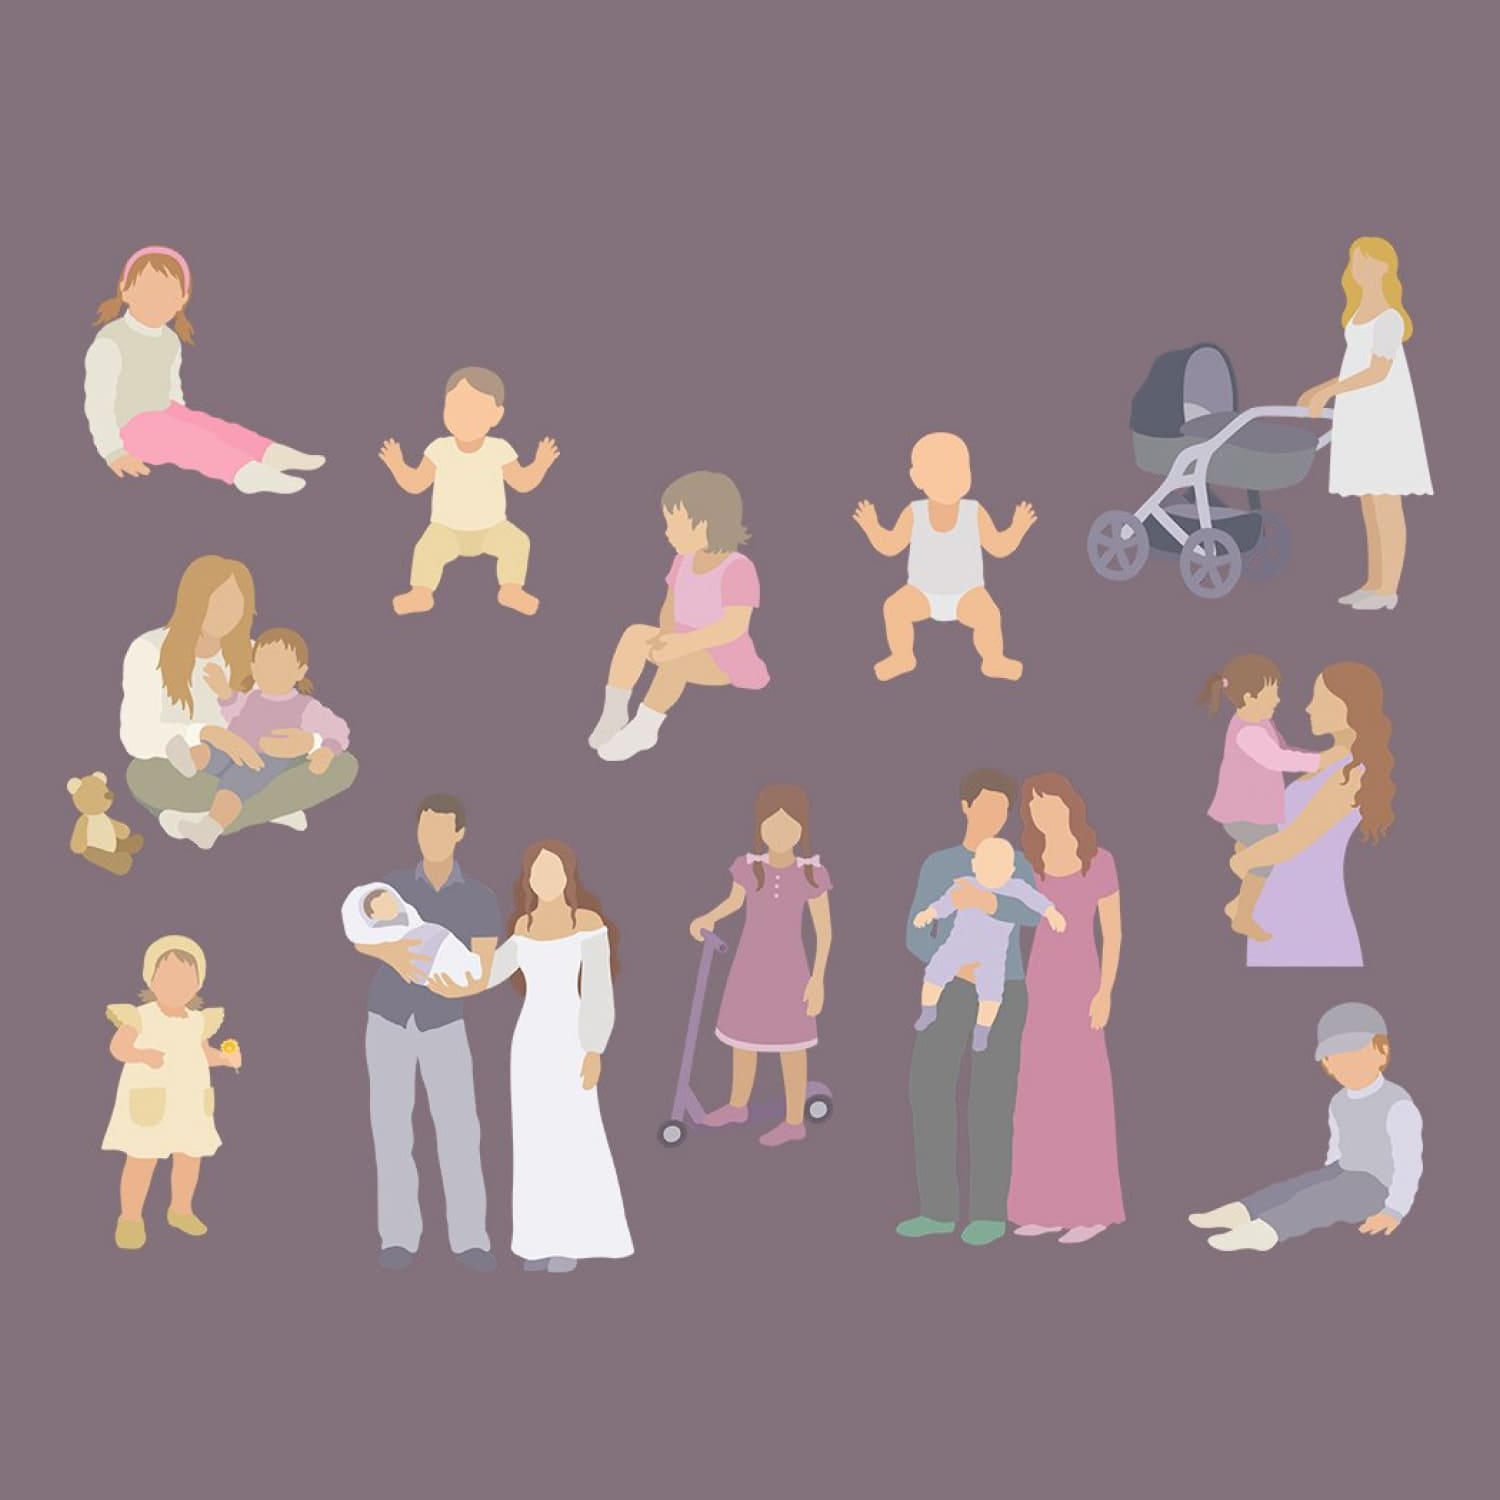 Variations of the combination of family and children are depicted on a gray background.